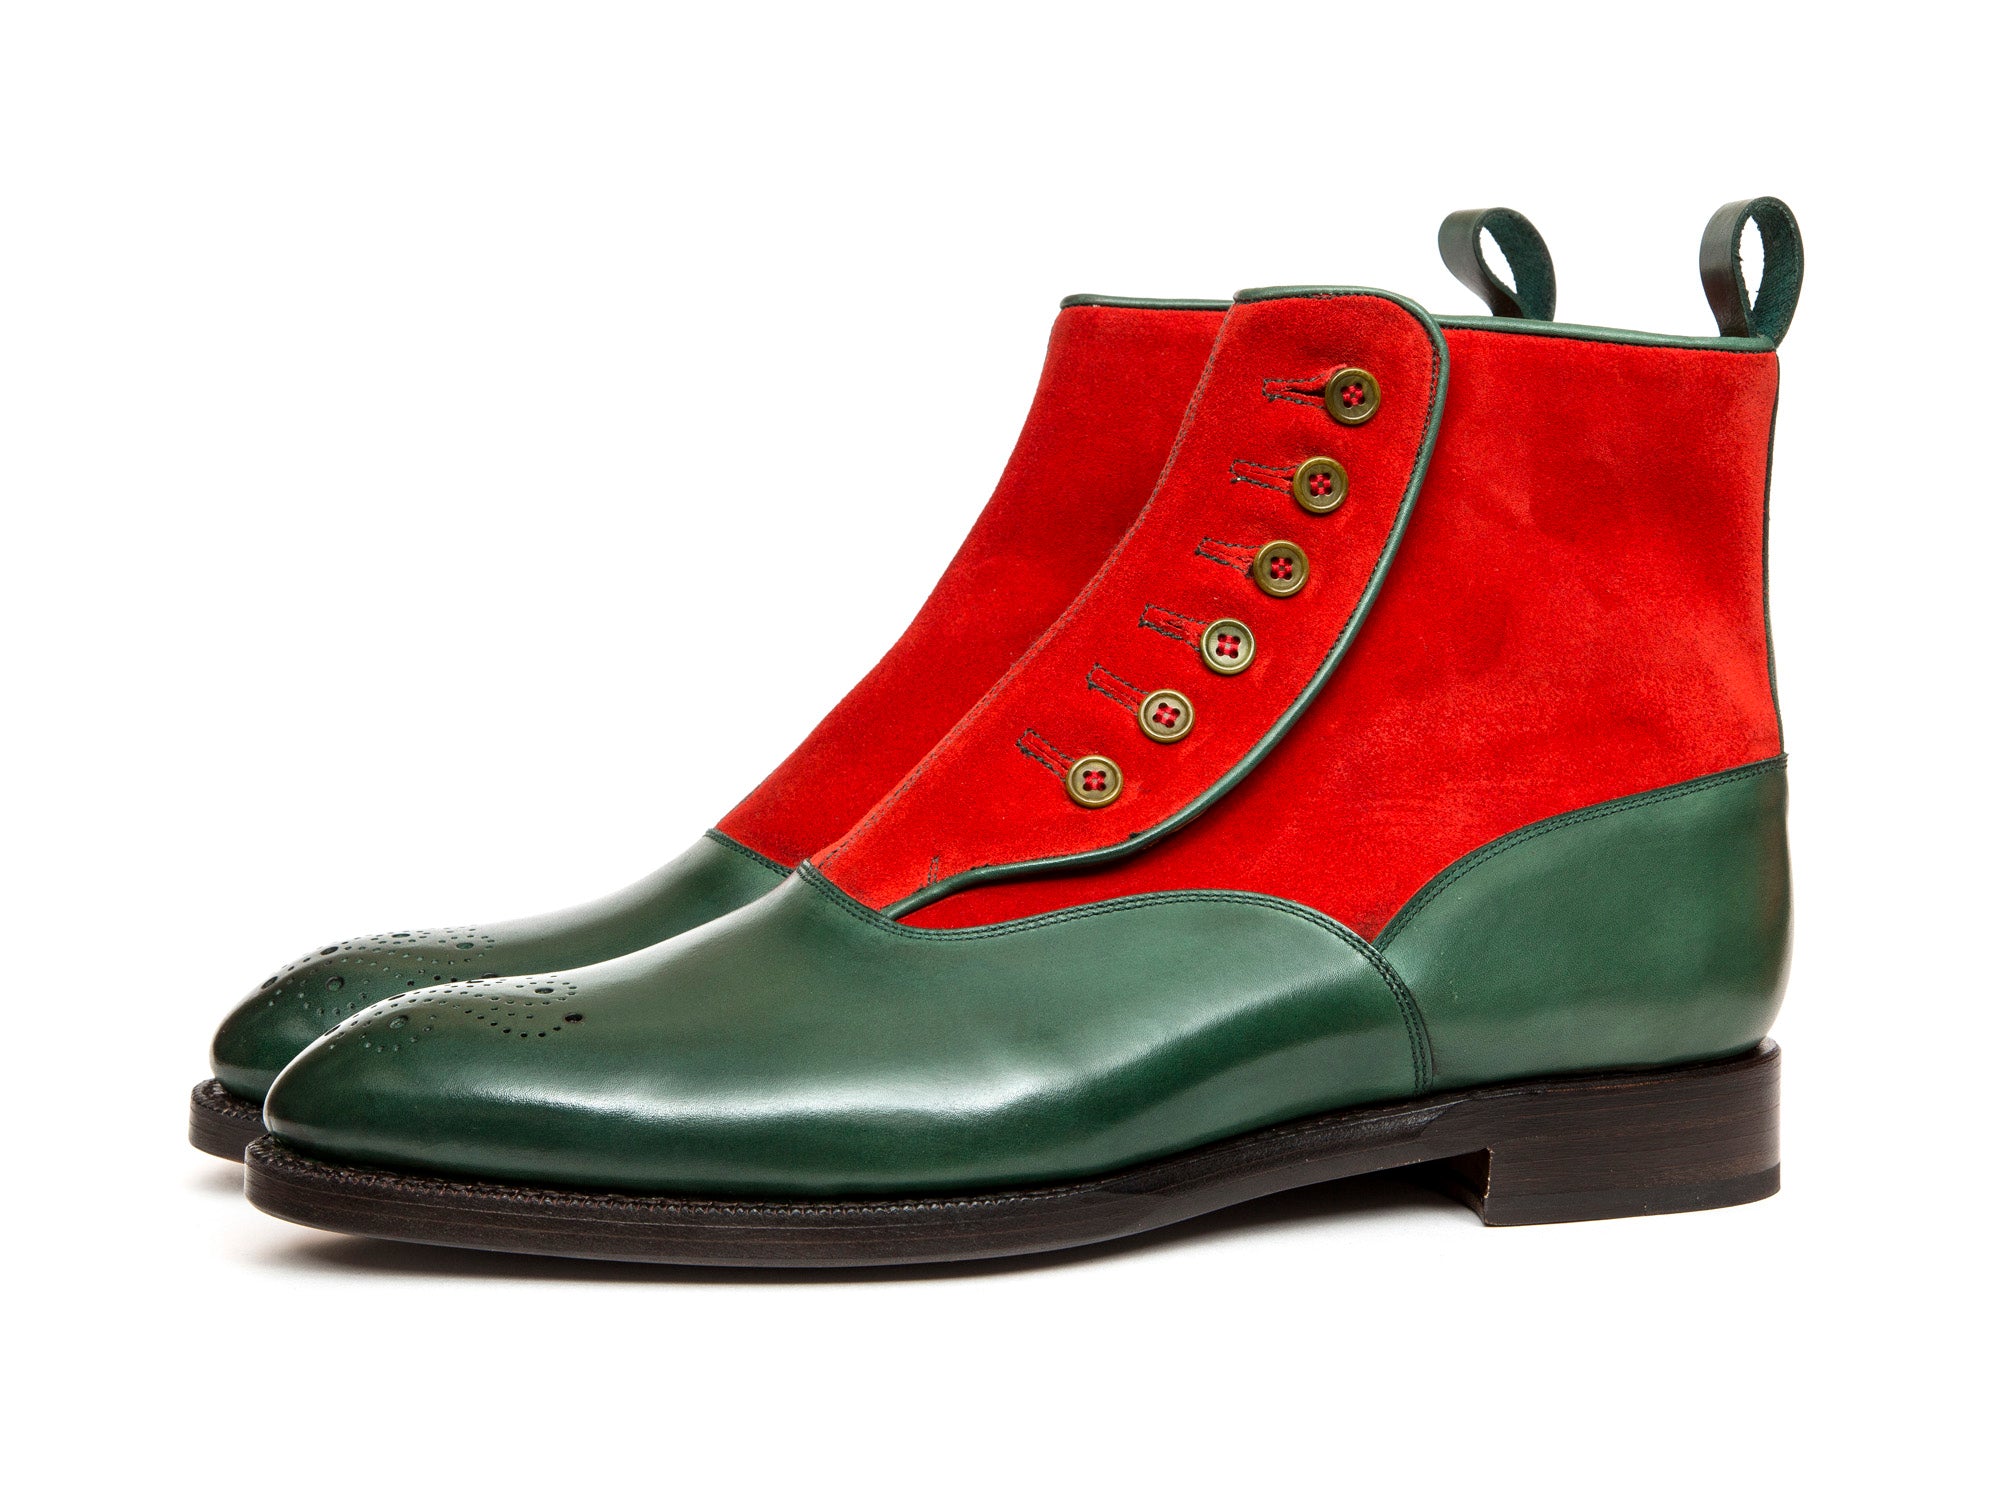 Westlake - MTO - Forest Calf / Red Suede - NGT Last - Single Leather Sole